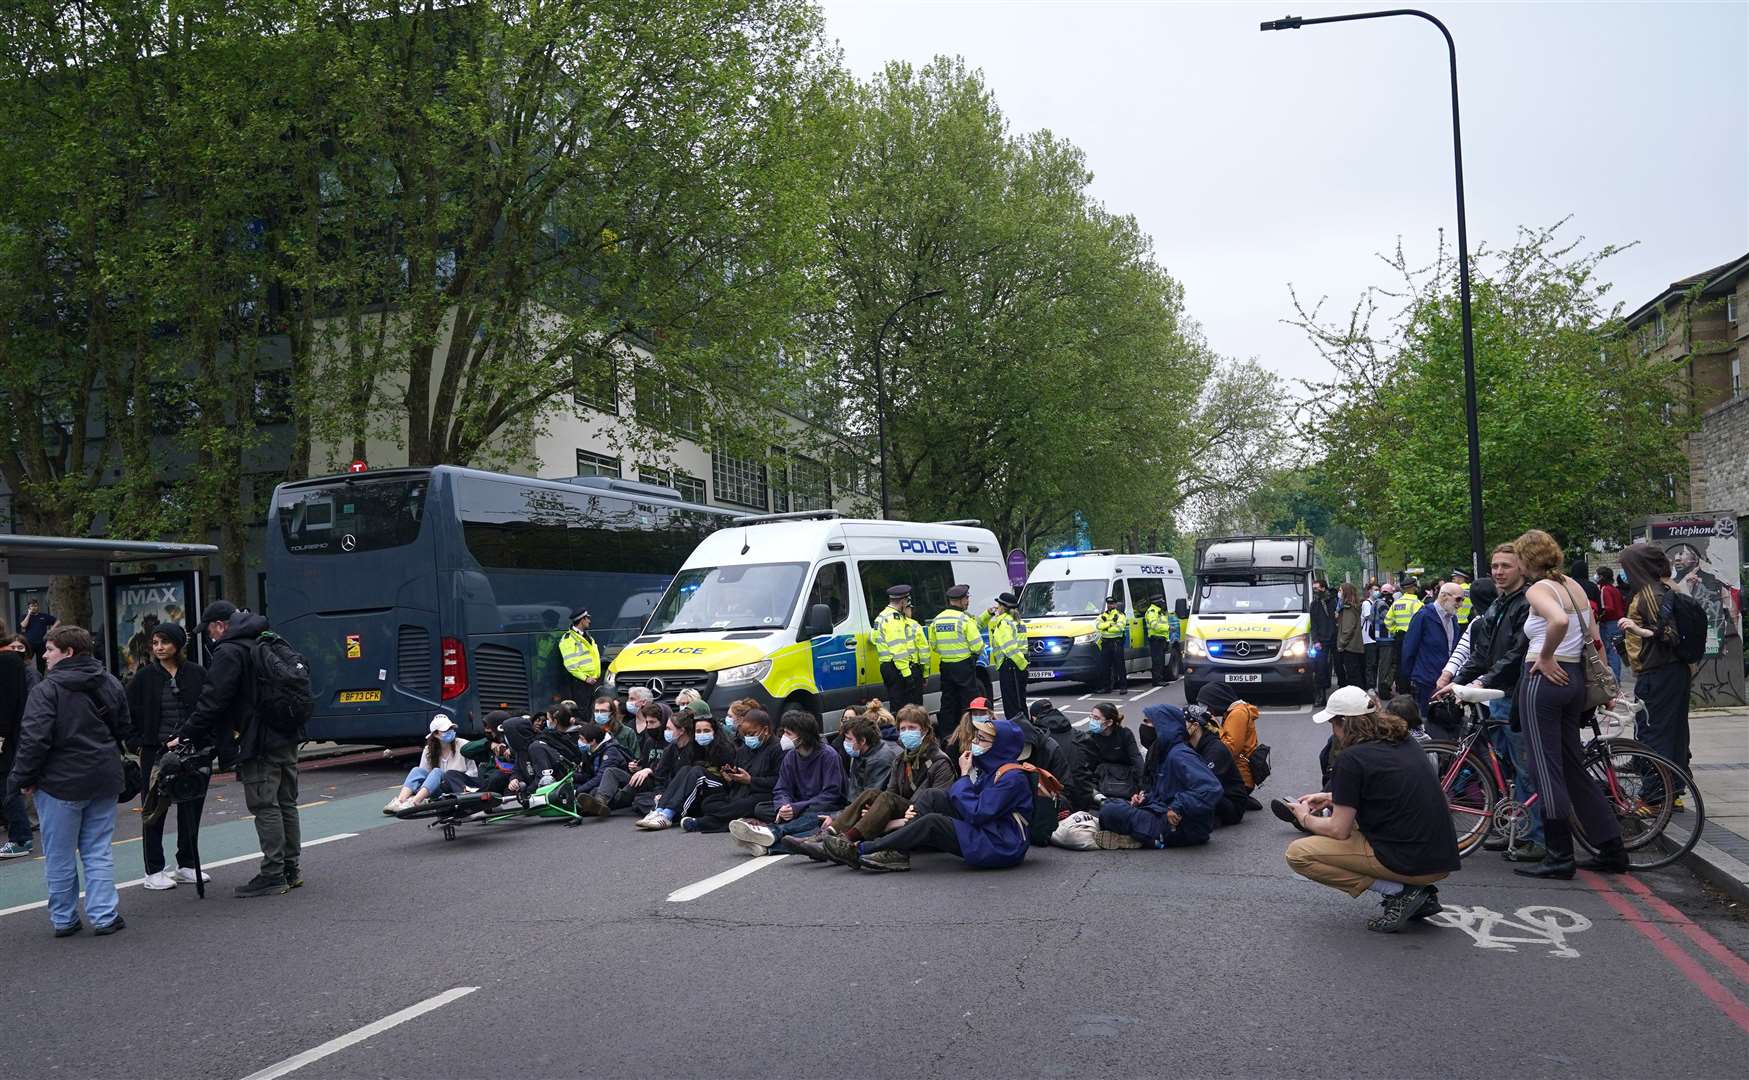 Protesters blocked the road (Yui Mok/PA)